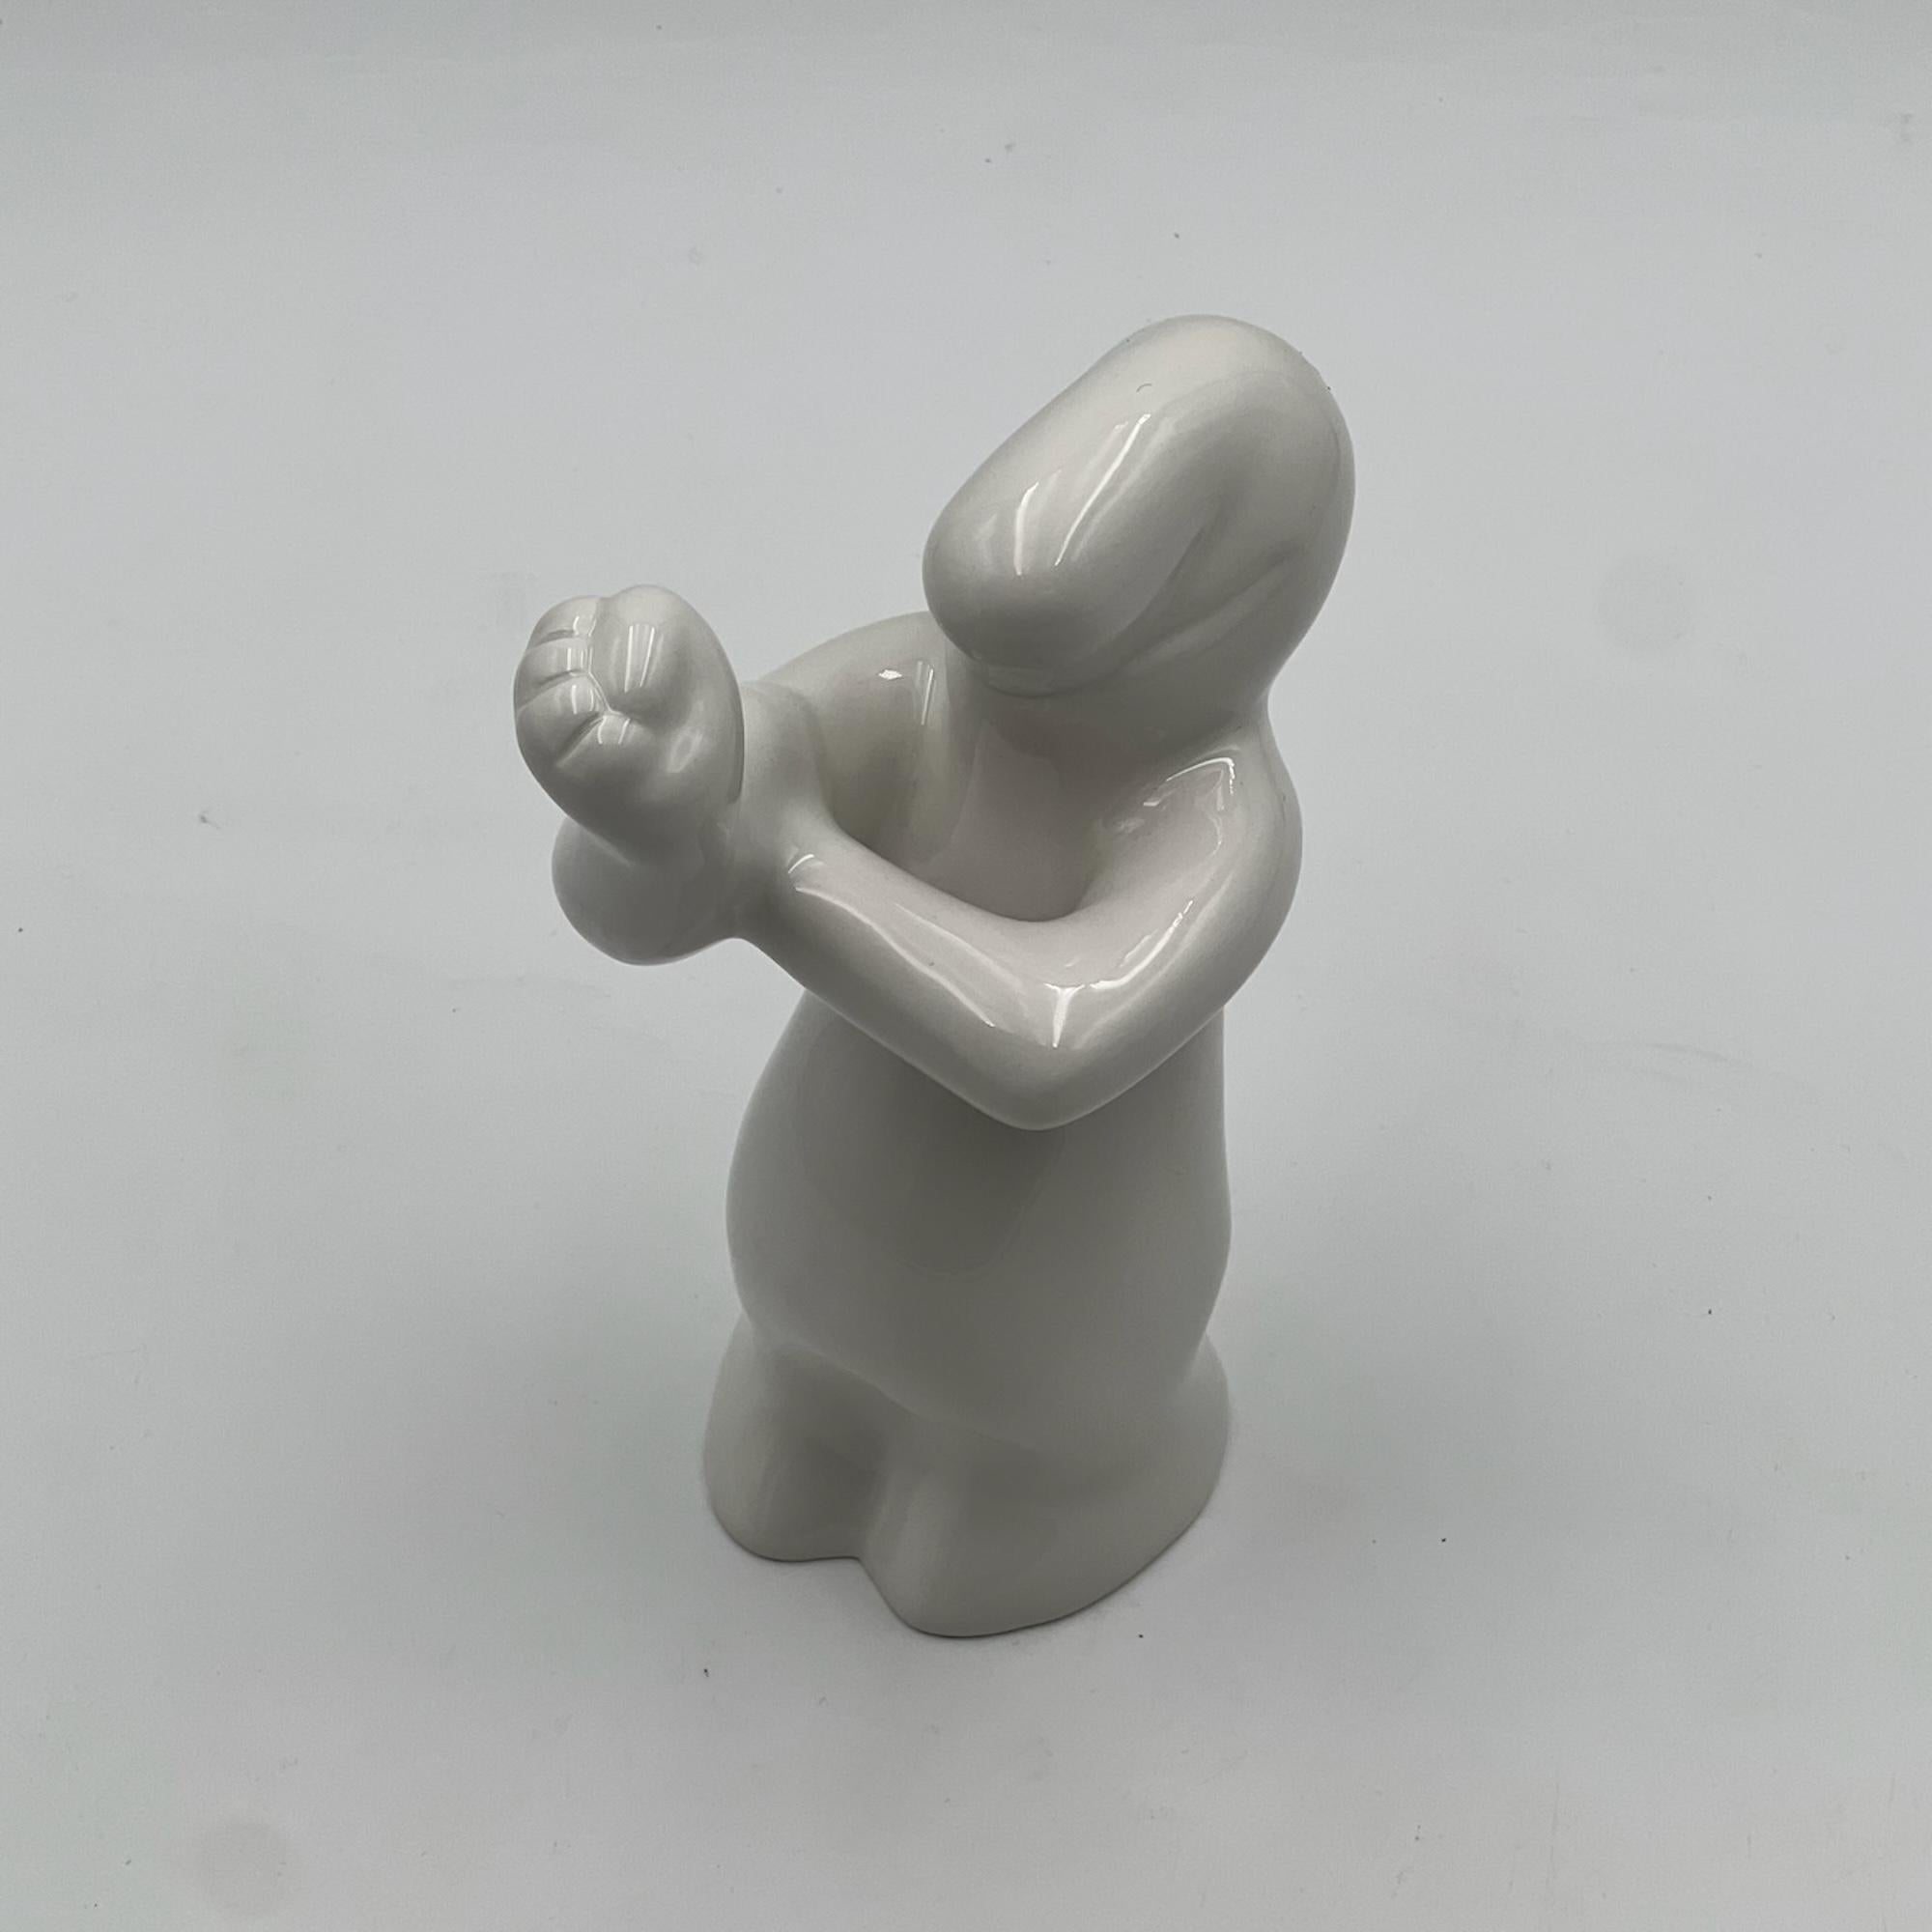 “La Linea” is an iconic set of ceramic sculptures realized by Osvaldo Cavandoli from the 50s until the early 70s.

A series of figurines representing  men and women in humorous postures – this one for instance is giving the finger!

In perfect